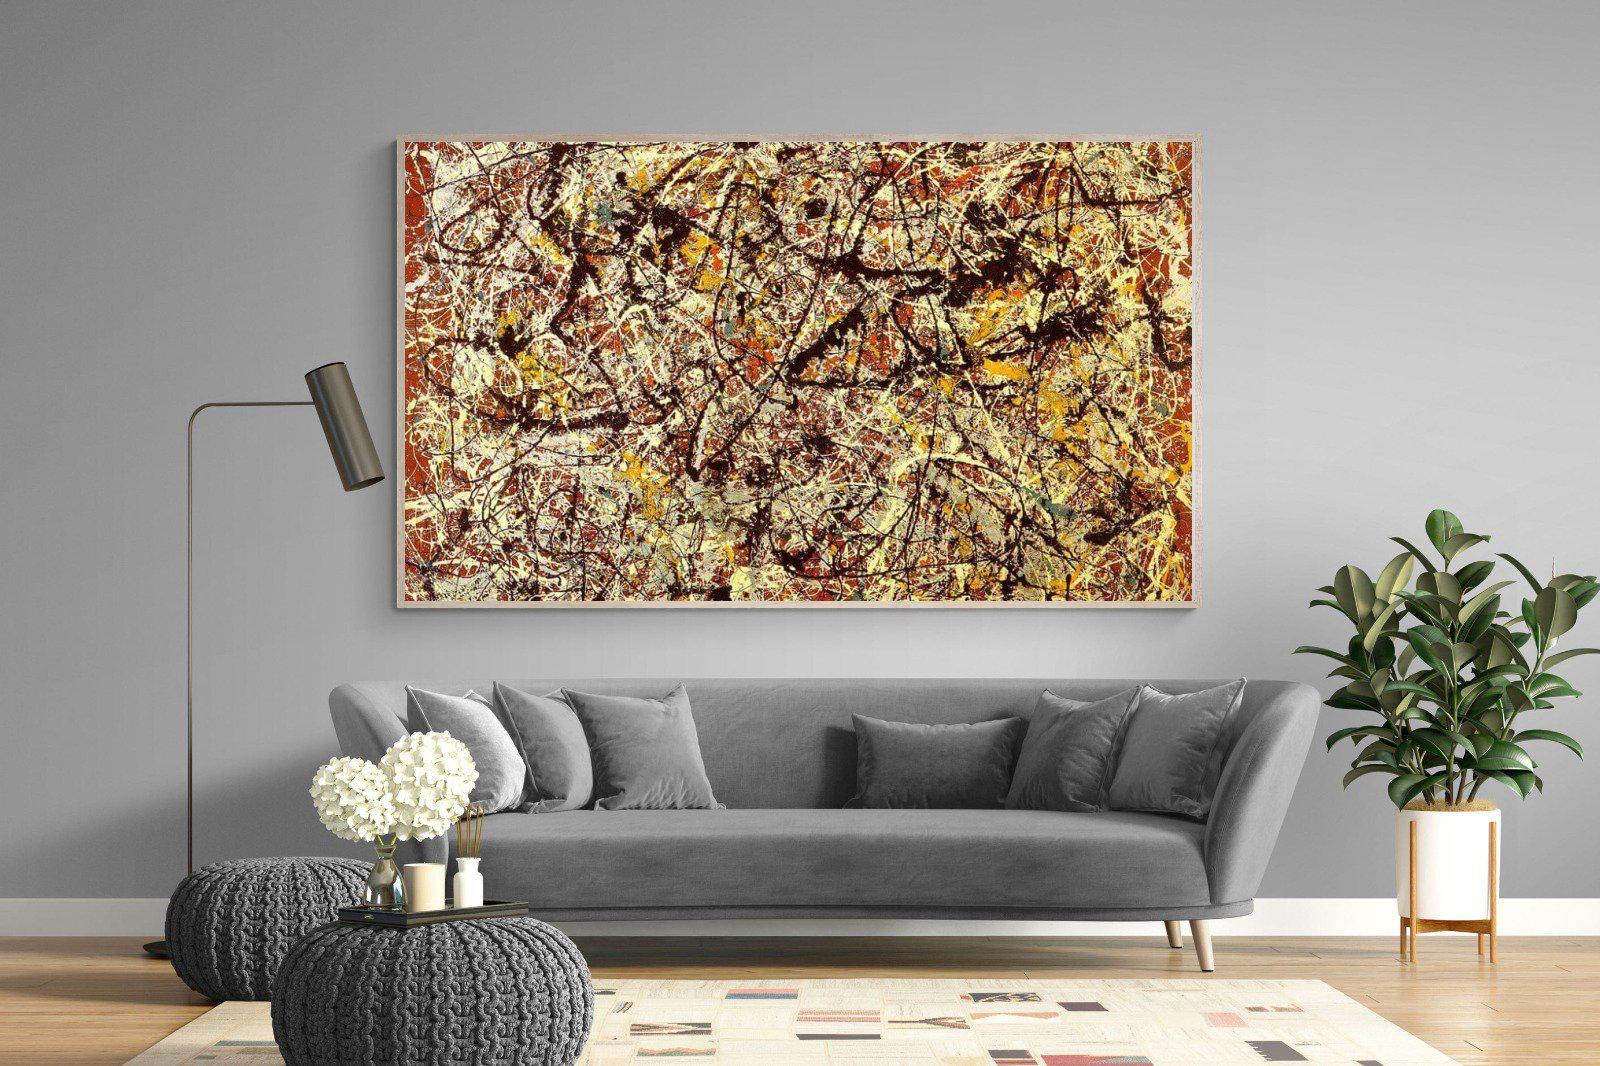 Mural on Indian Red Ground-Wall_Art-220 x 130cm-Mounted Canvas-Wood-Pixalot